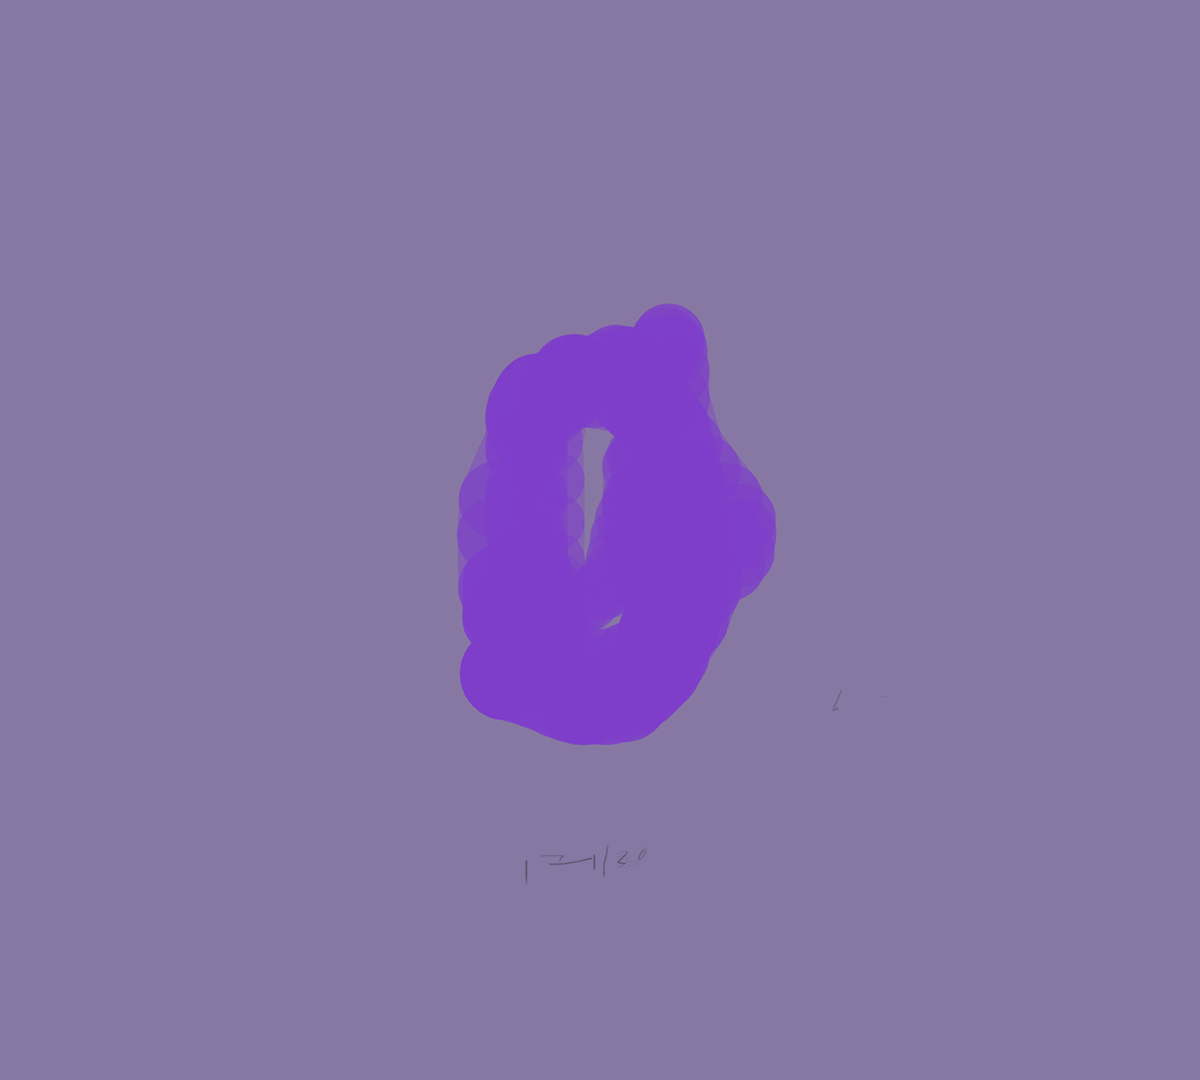 Brushy browser painting in purple on a gray background.